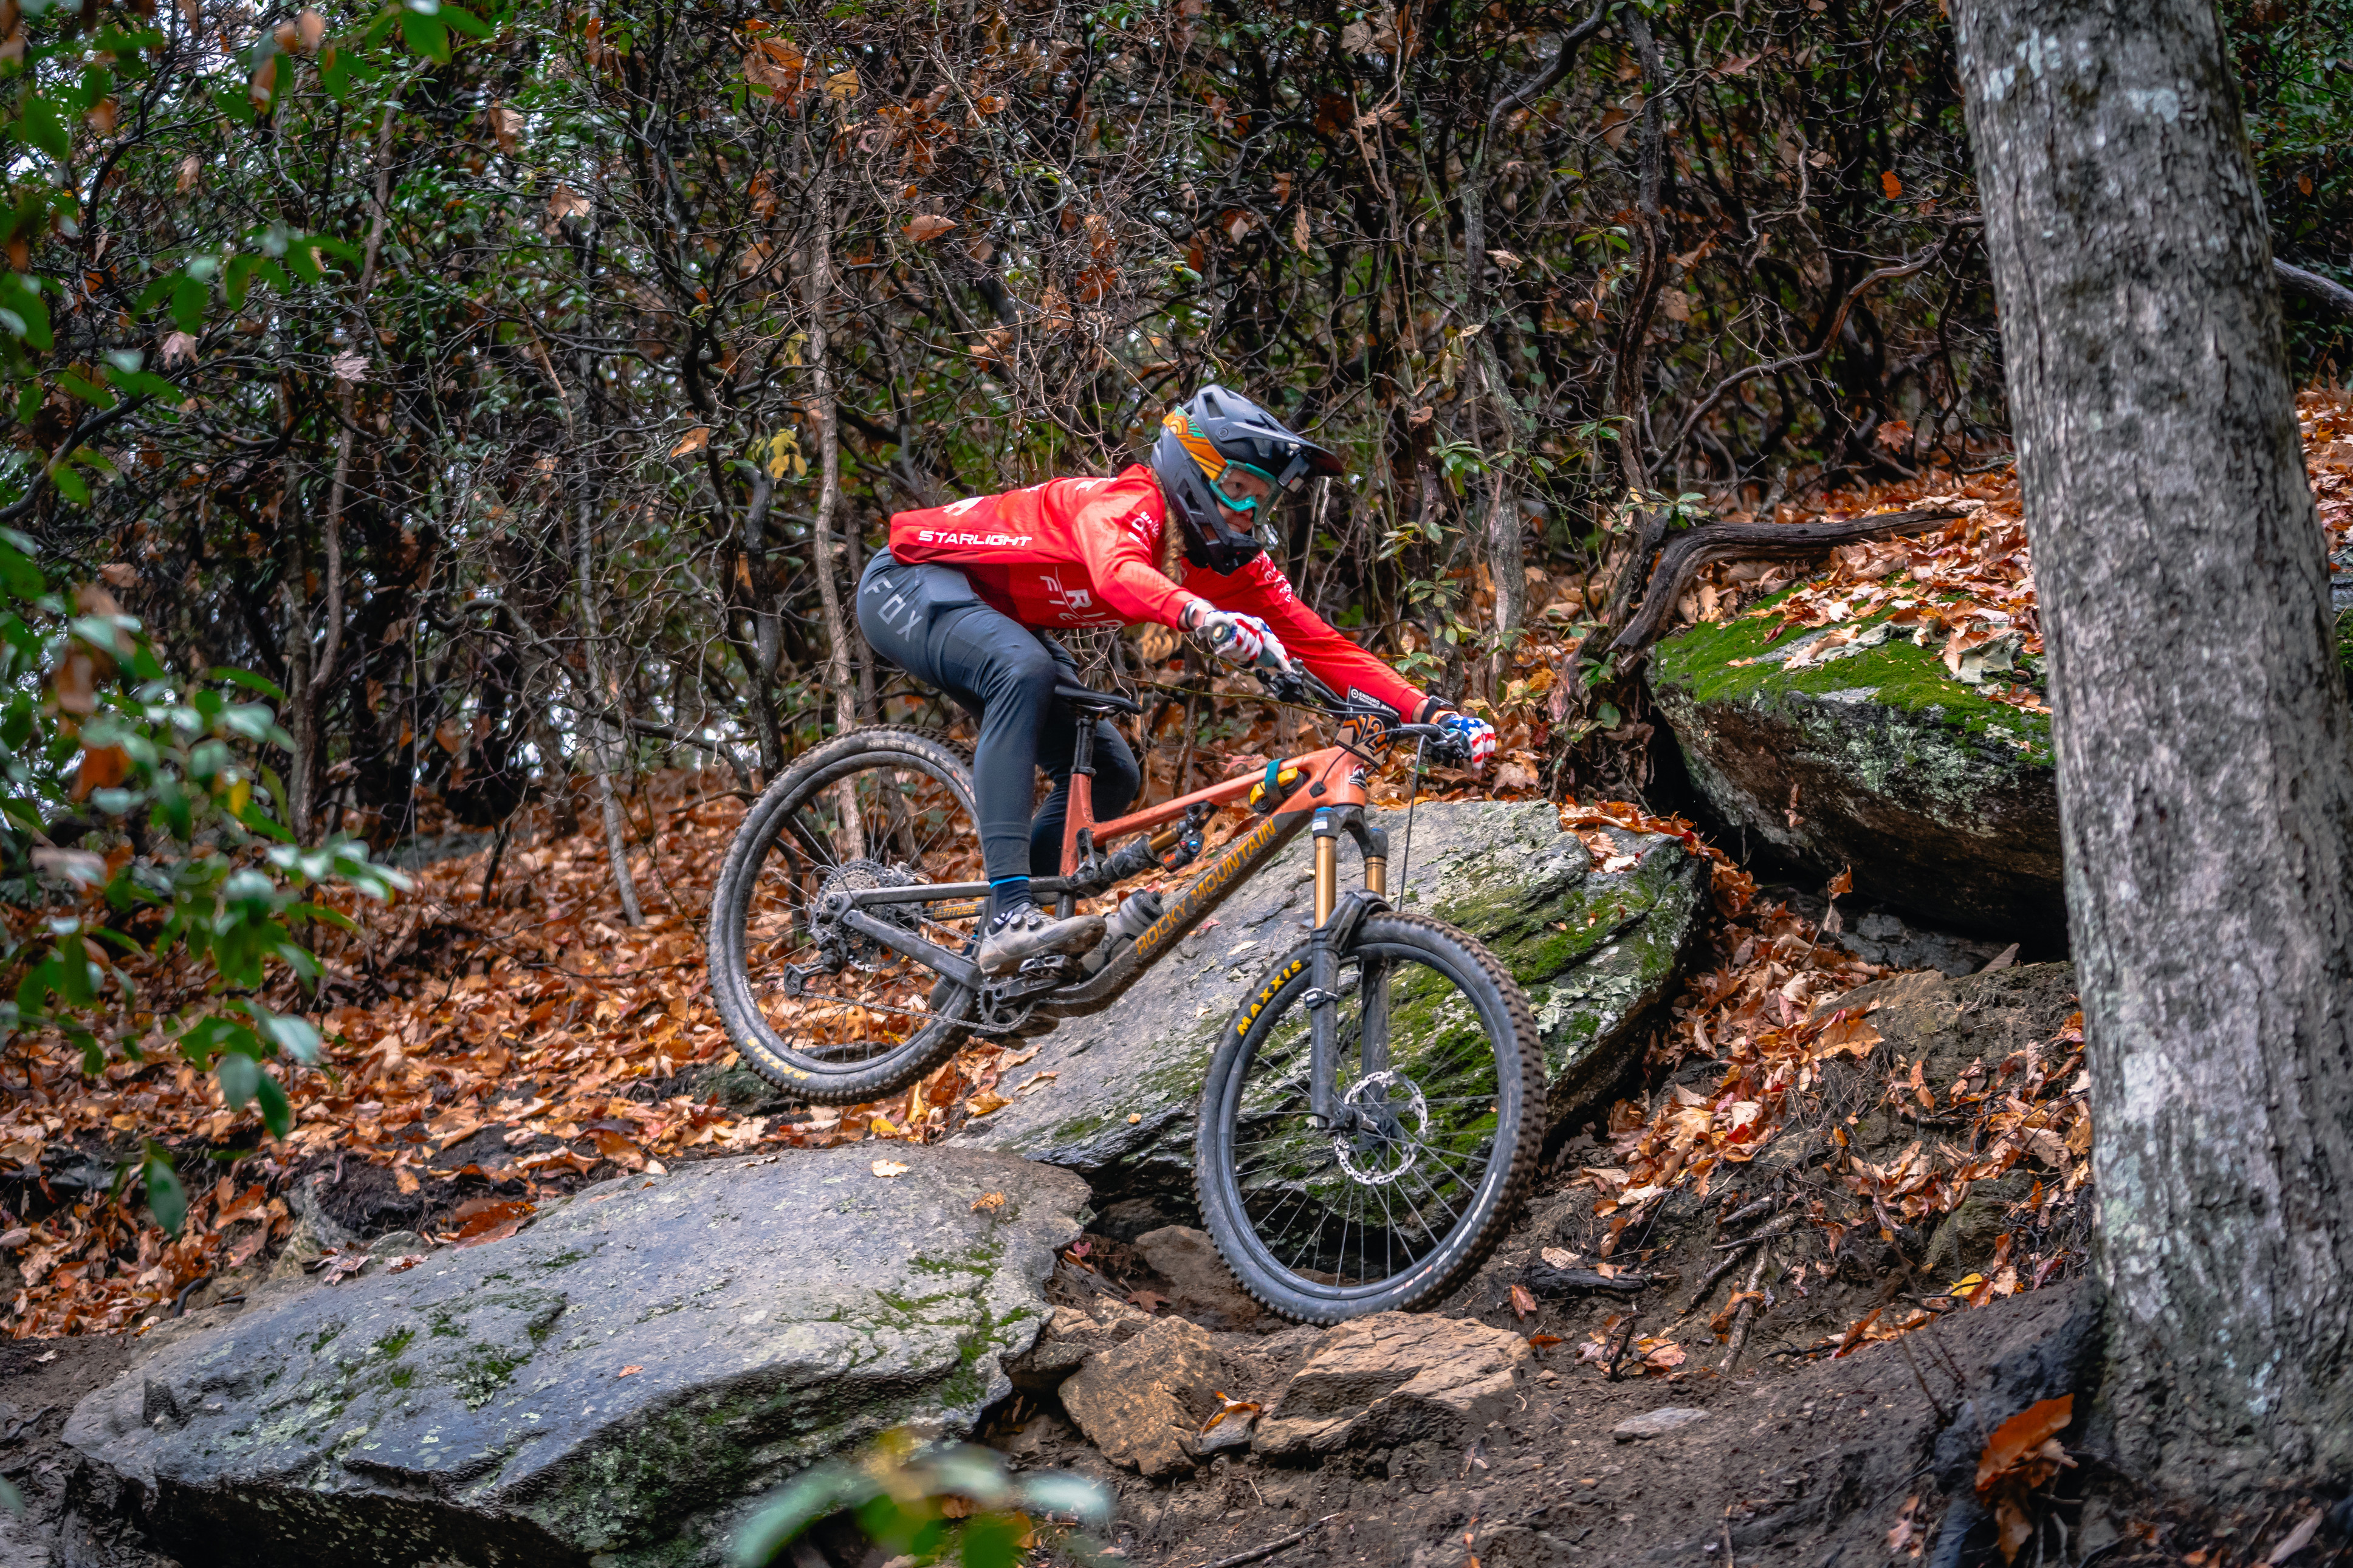 Abigail Snyder on mountain bike racing through wooded and rocky terrain